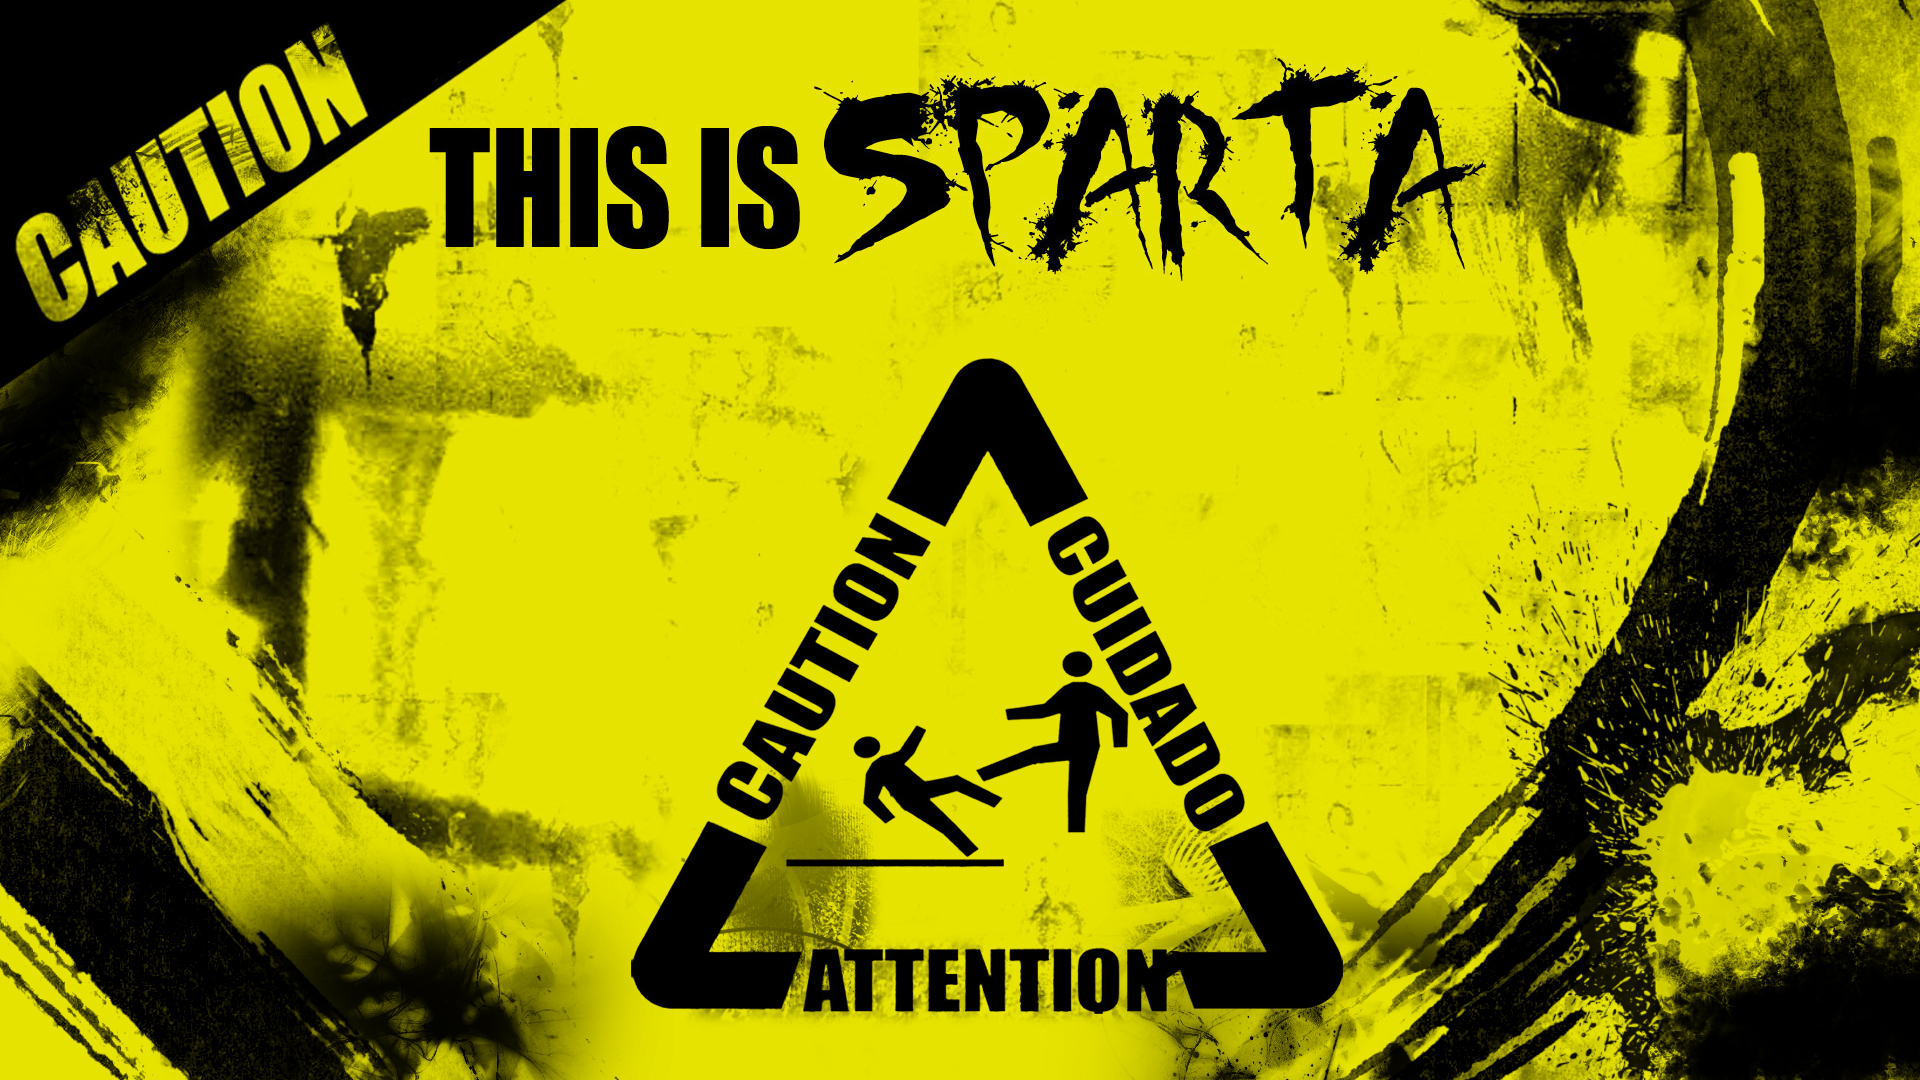 General 1920x1080 300 warning signs digital art yellow humor triangle Sparta yellow background grunge typography